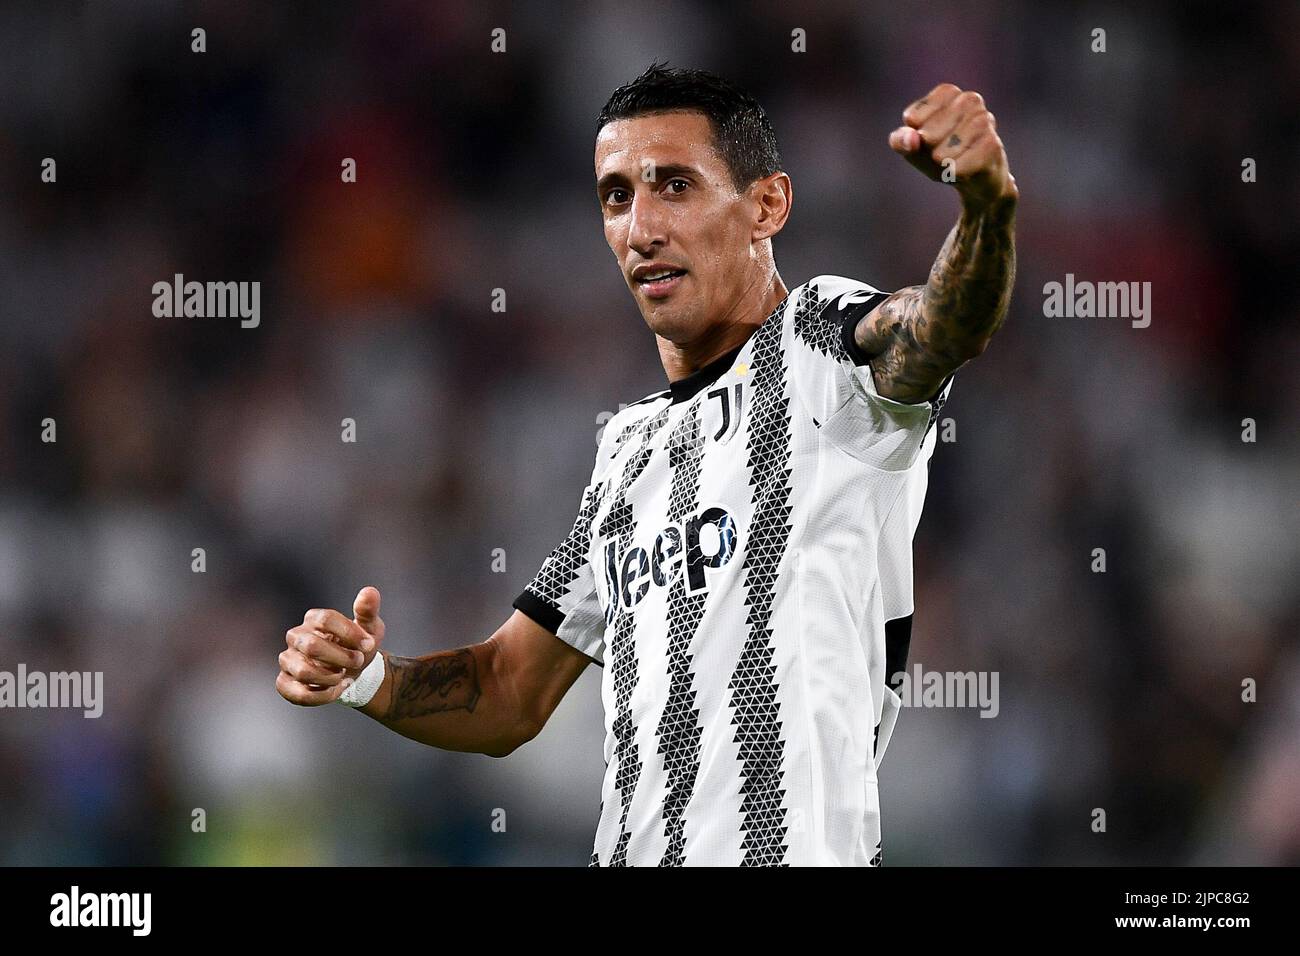 Turin, Italy. 15 August 2022. Angel Di Maria of Juventus FC celebrates after scoring a goal during the Serie A football match between Juventus FC and US Sassuolo. Credit: Nicolò Campo/Alamy Live News Stock Photo